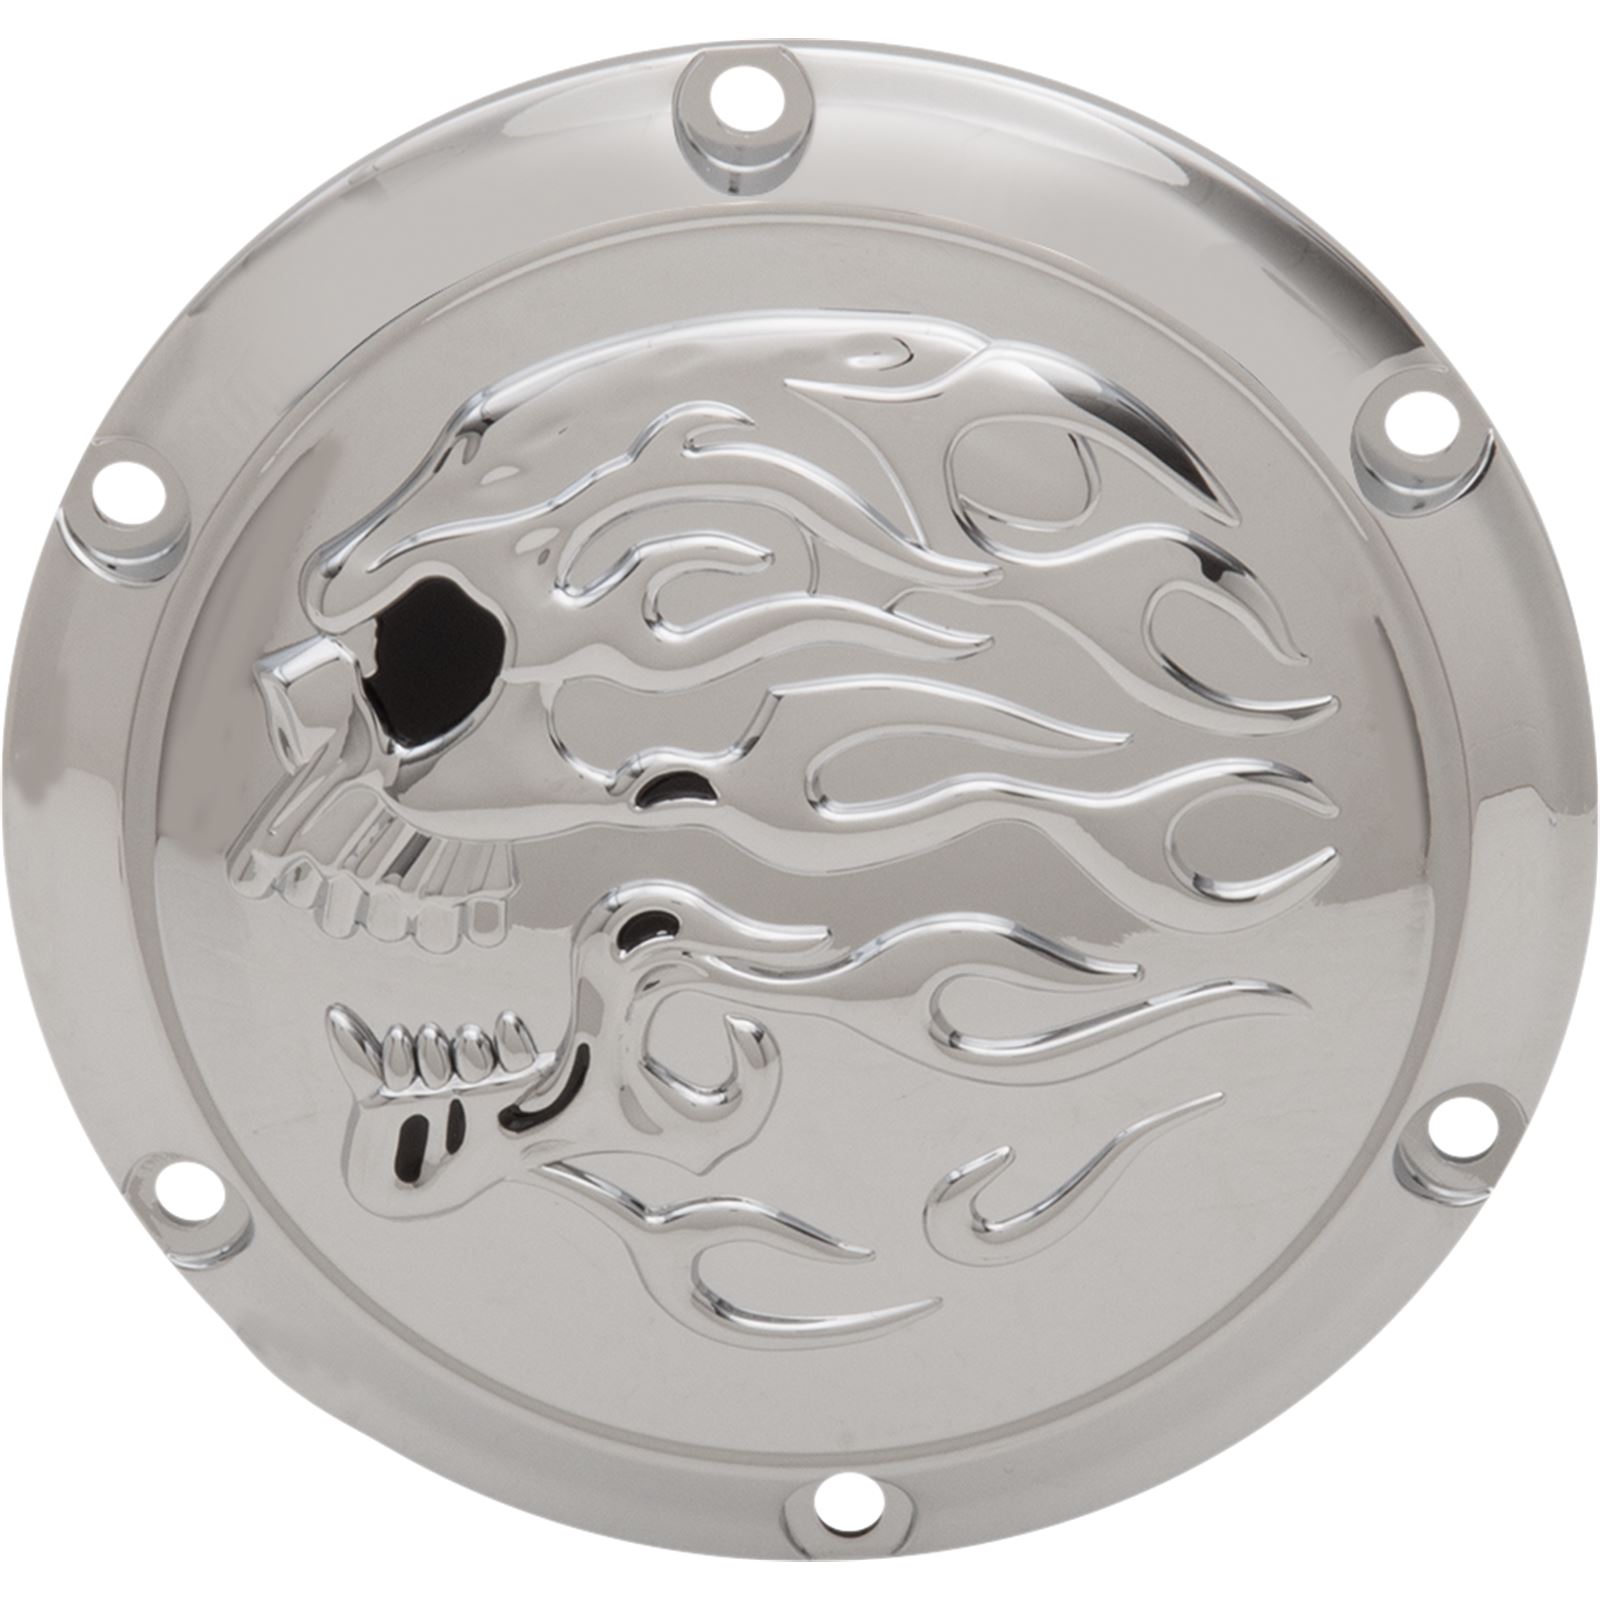 Drag Specialties Flaming Skull Derby Cover - Chrome